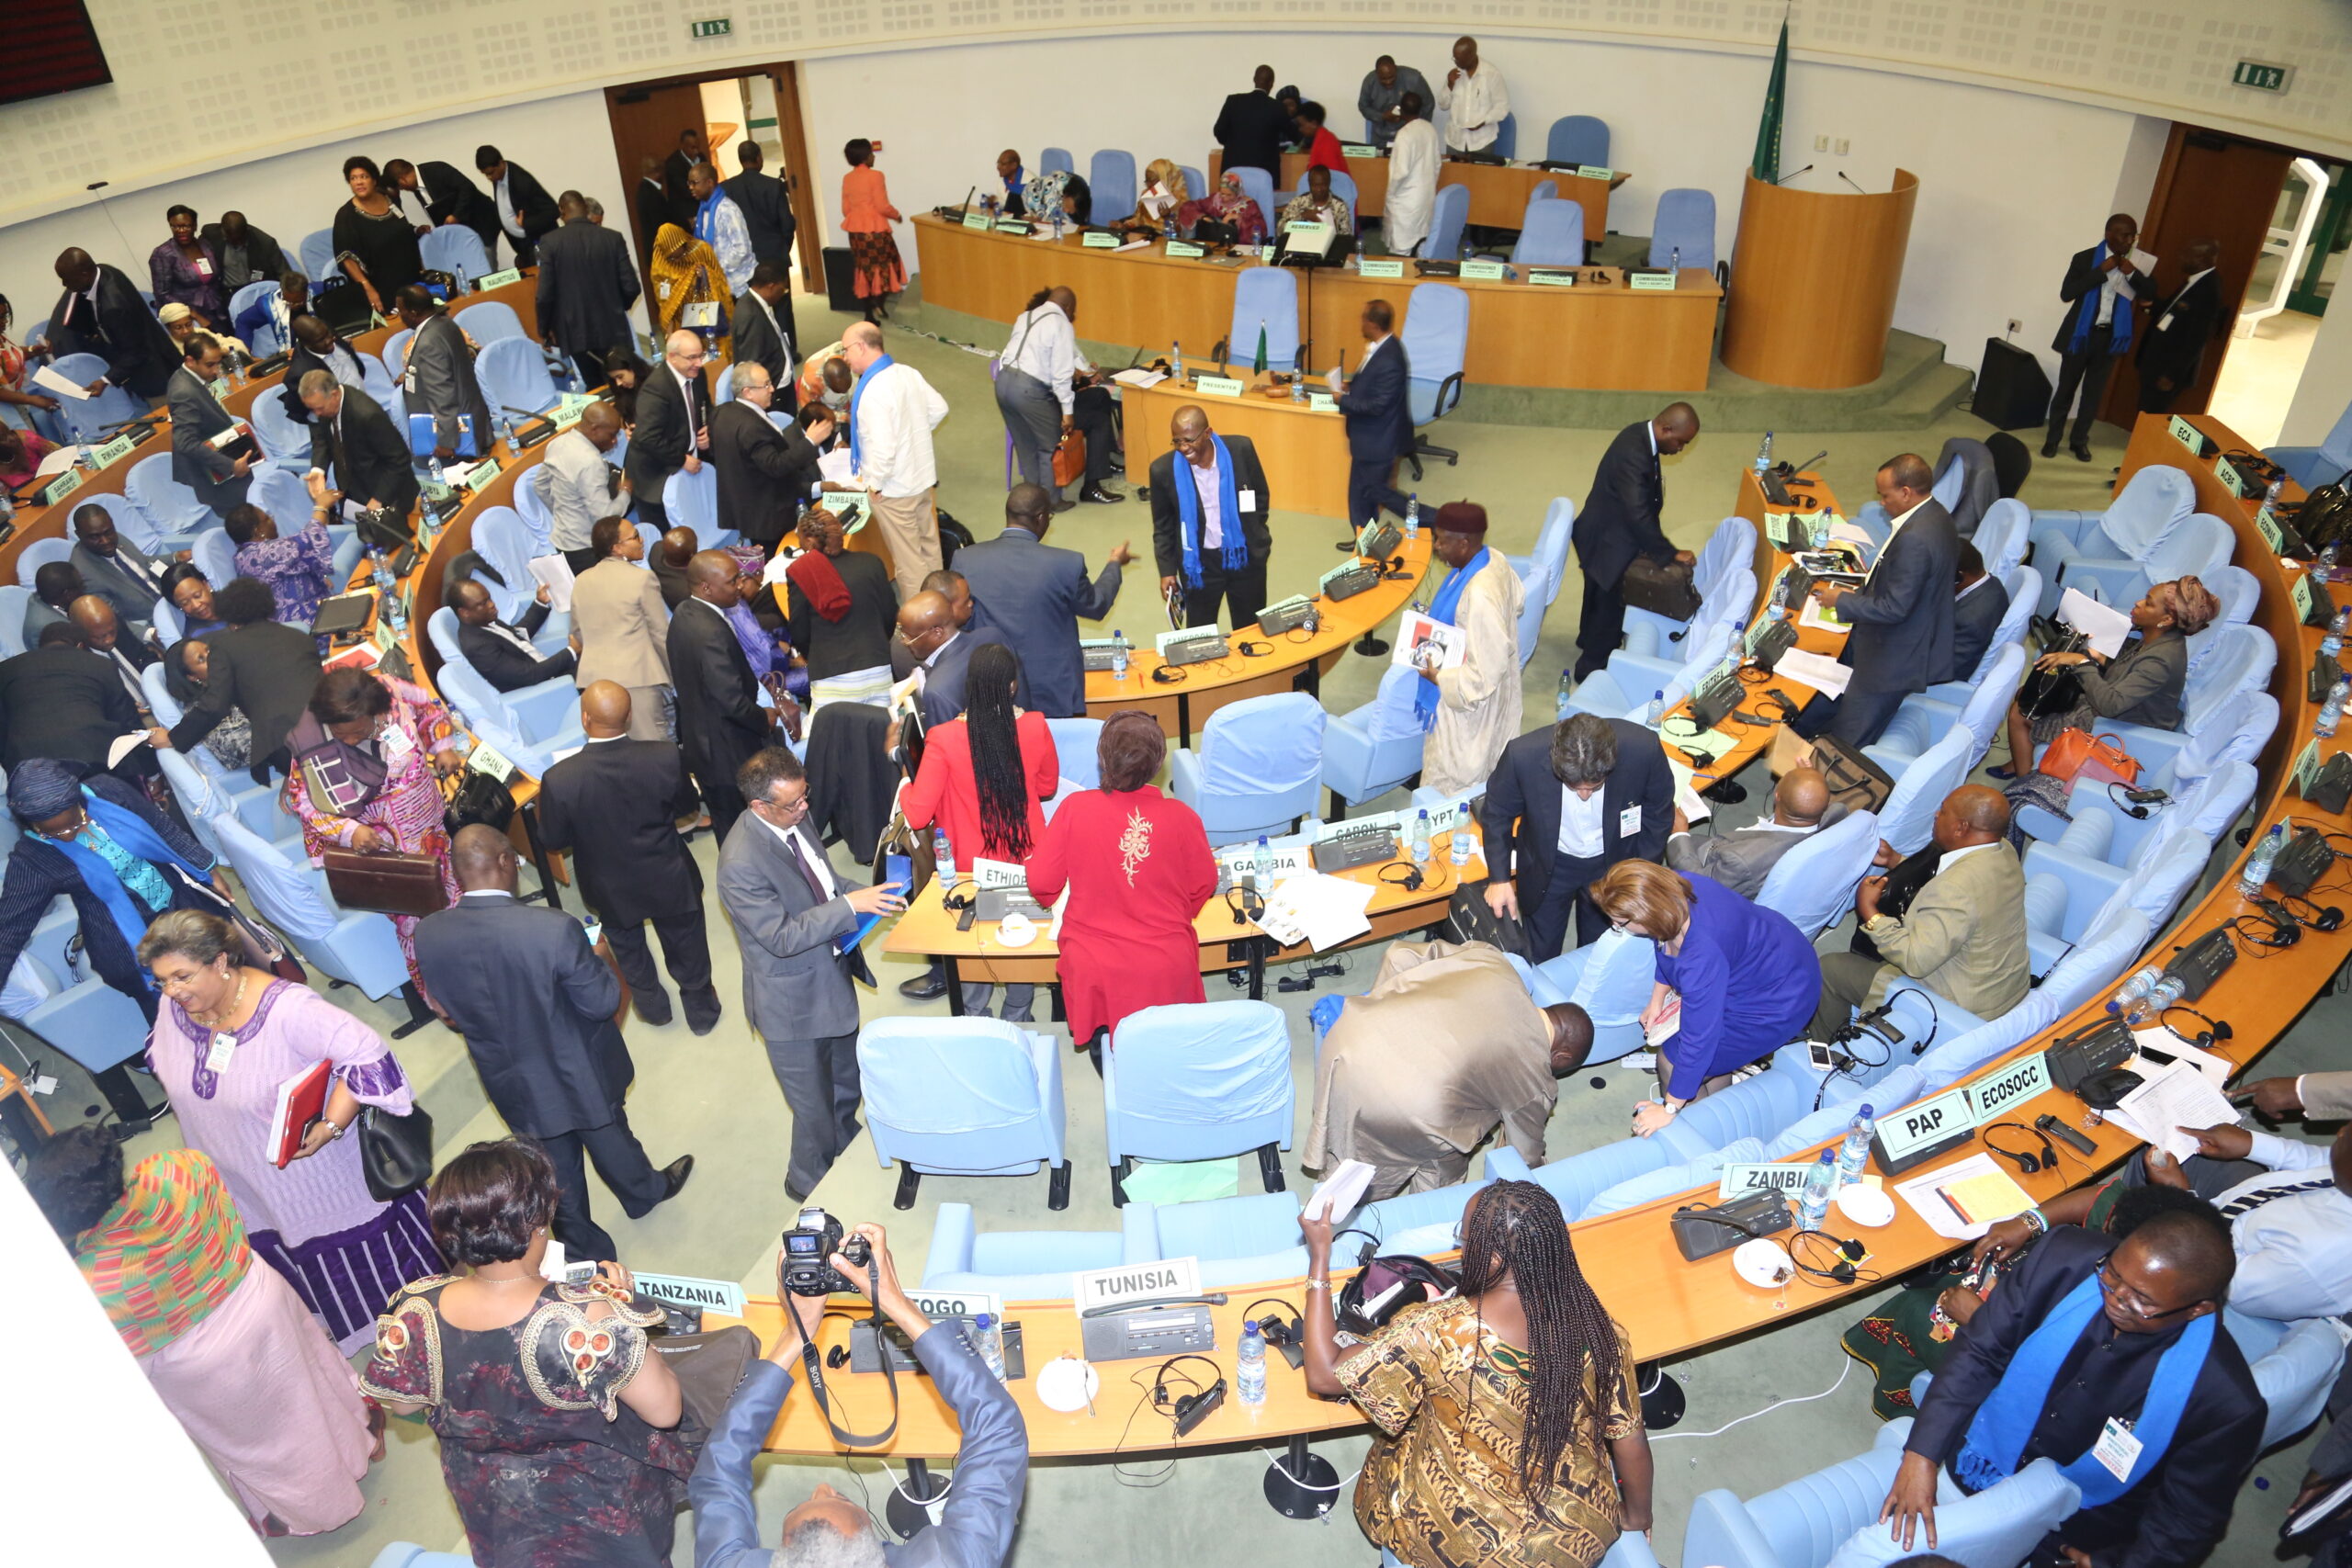 Ethiopia: The 3rd Ministerial Retreat of AU’s Executive Council Concluded